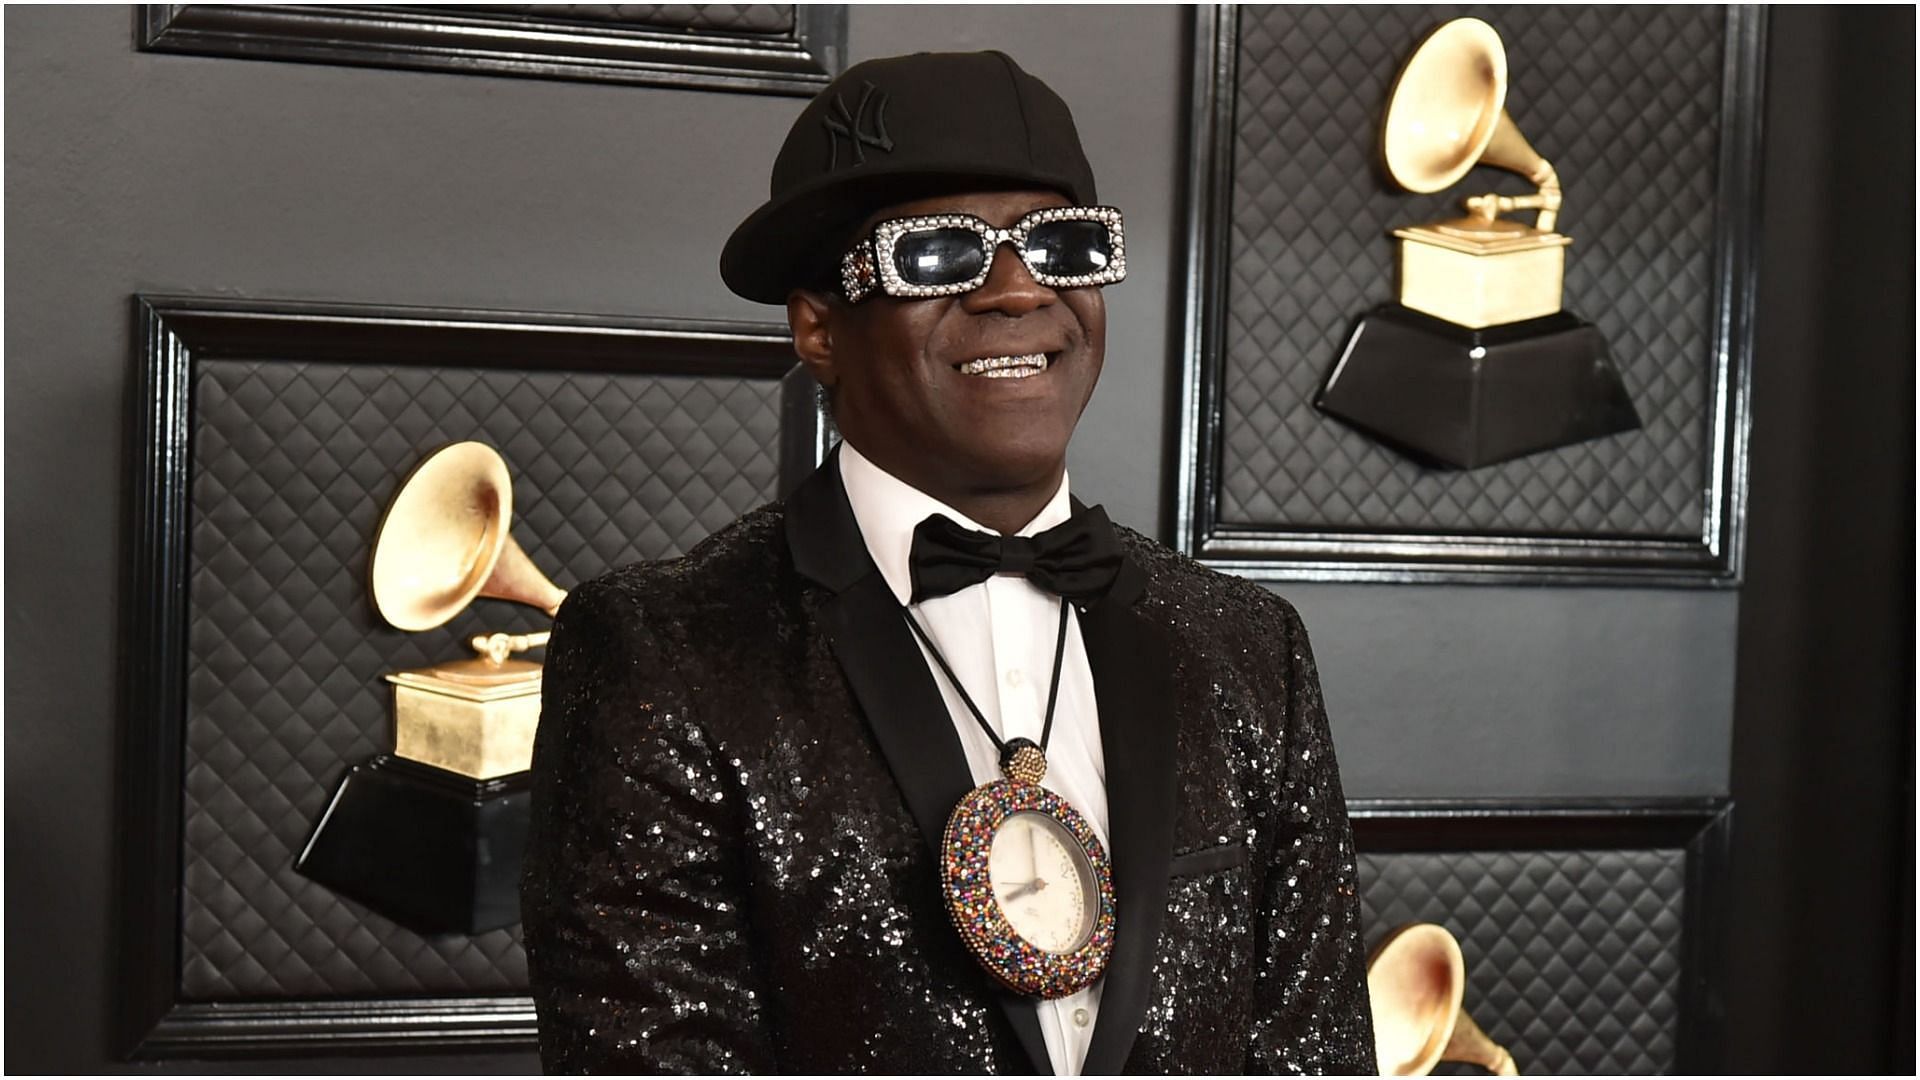 Flavor Flav at the 62nd Annual Grammy Awards at Staples Center in Los Angeles, CA on January 26, 2020. (Image via Getty Images)